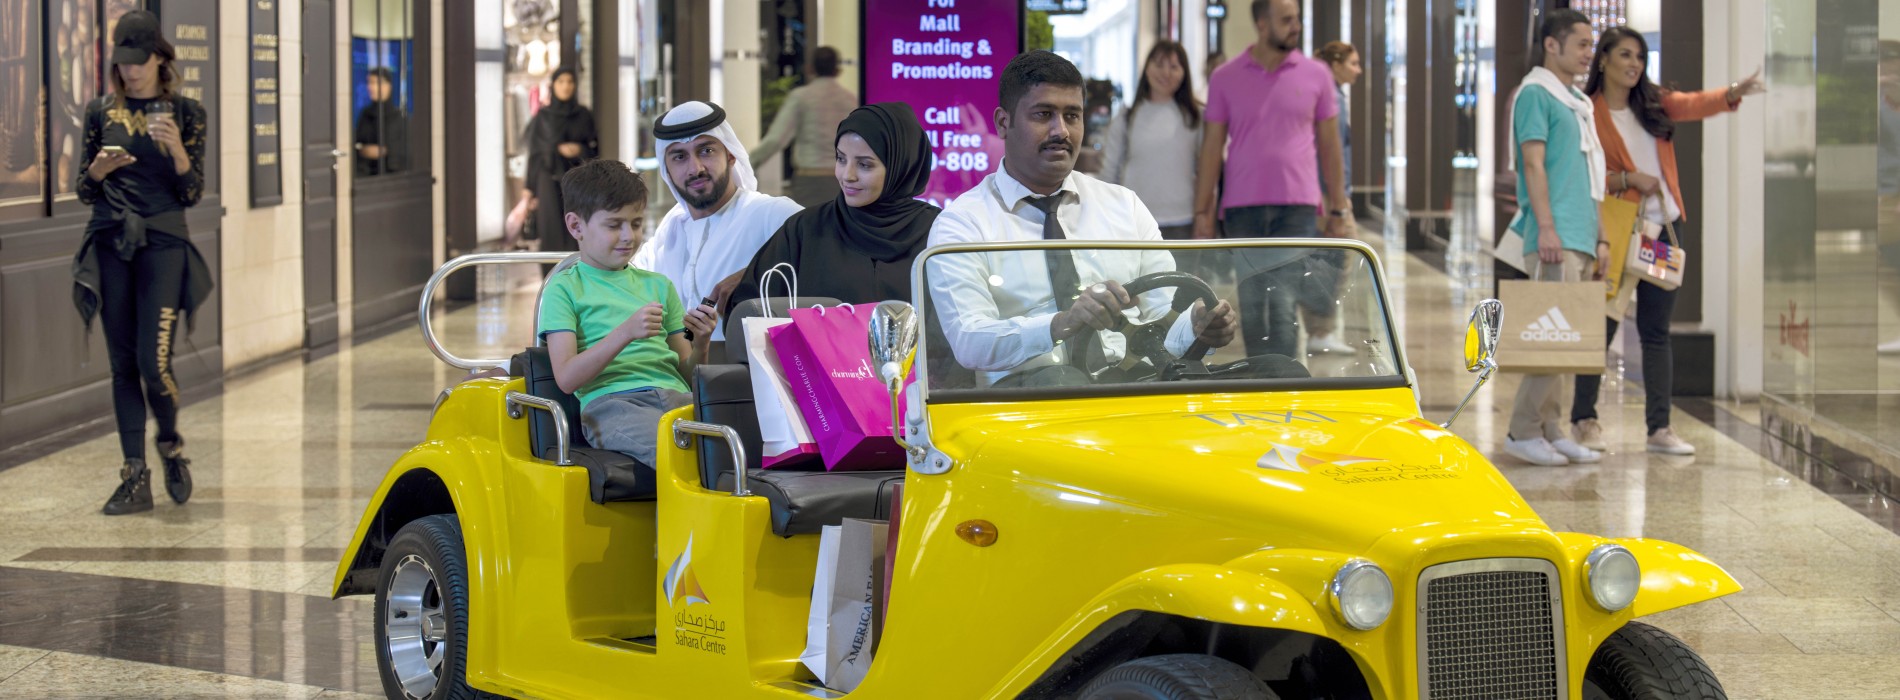 Enjoy Sharjah’s shopping experience at its modern malls and traditional souks